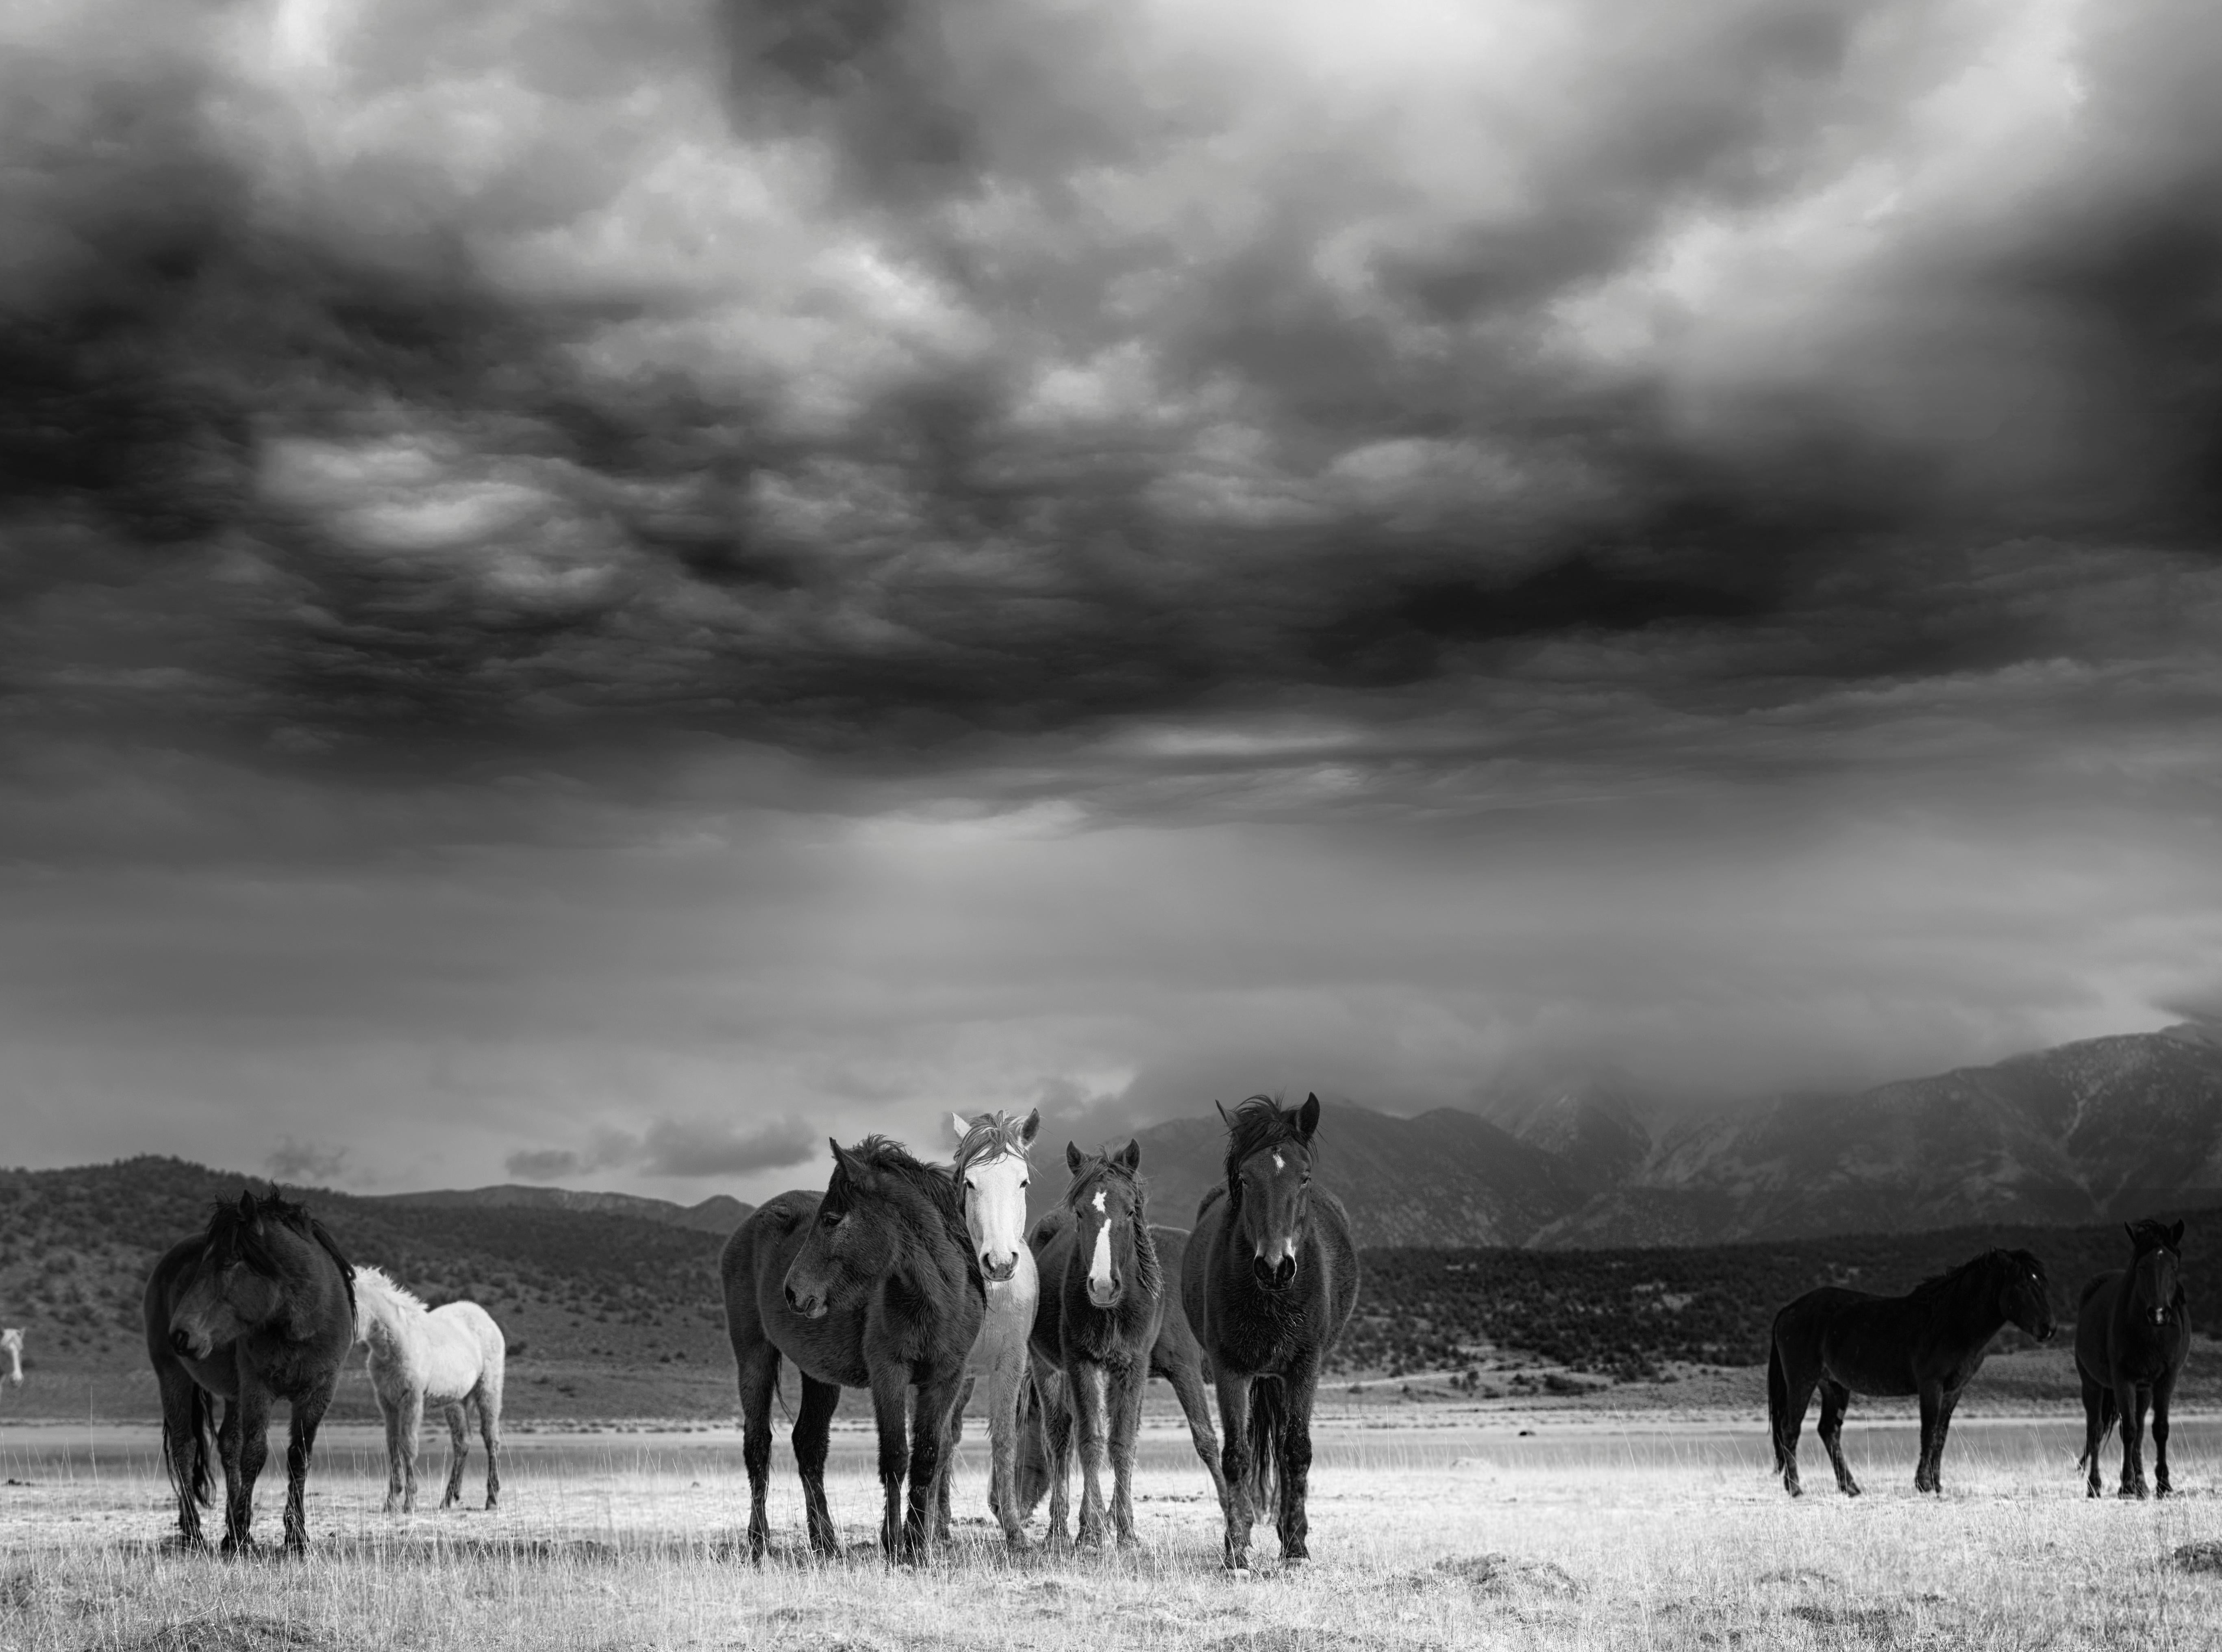 Shane Russeck Animal Print - Black and White Photography of Wild Horses, Mustangs  "The Calm" 28x40 Unsigned